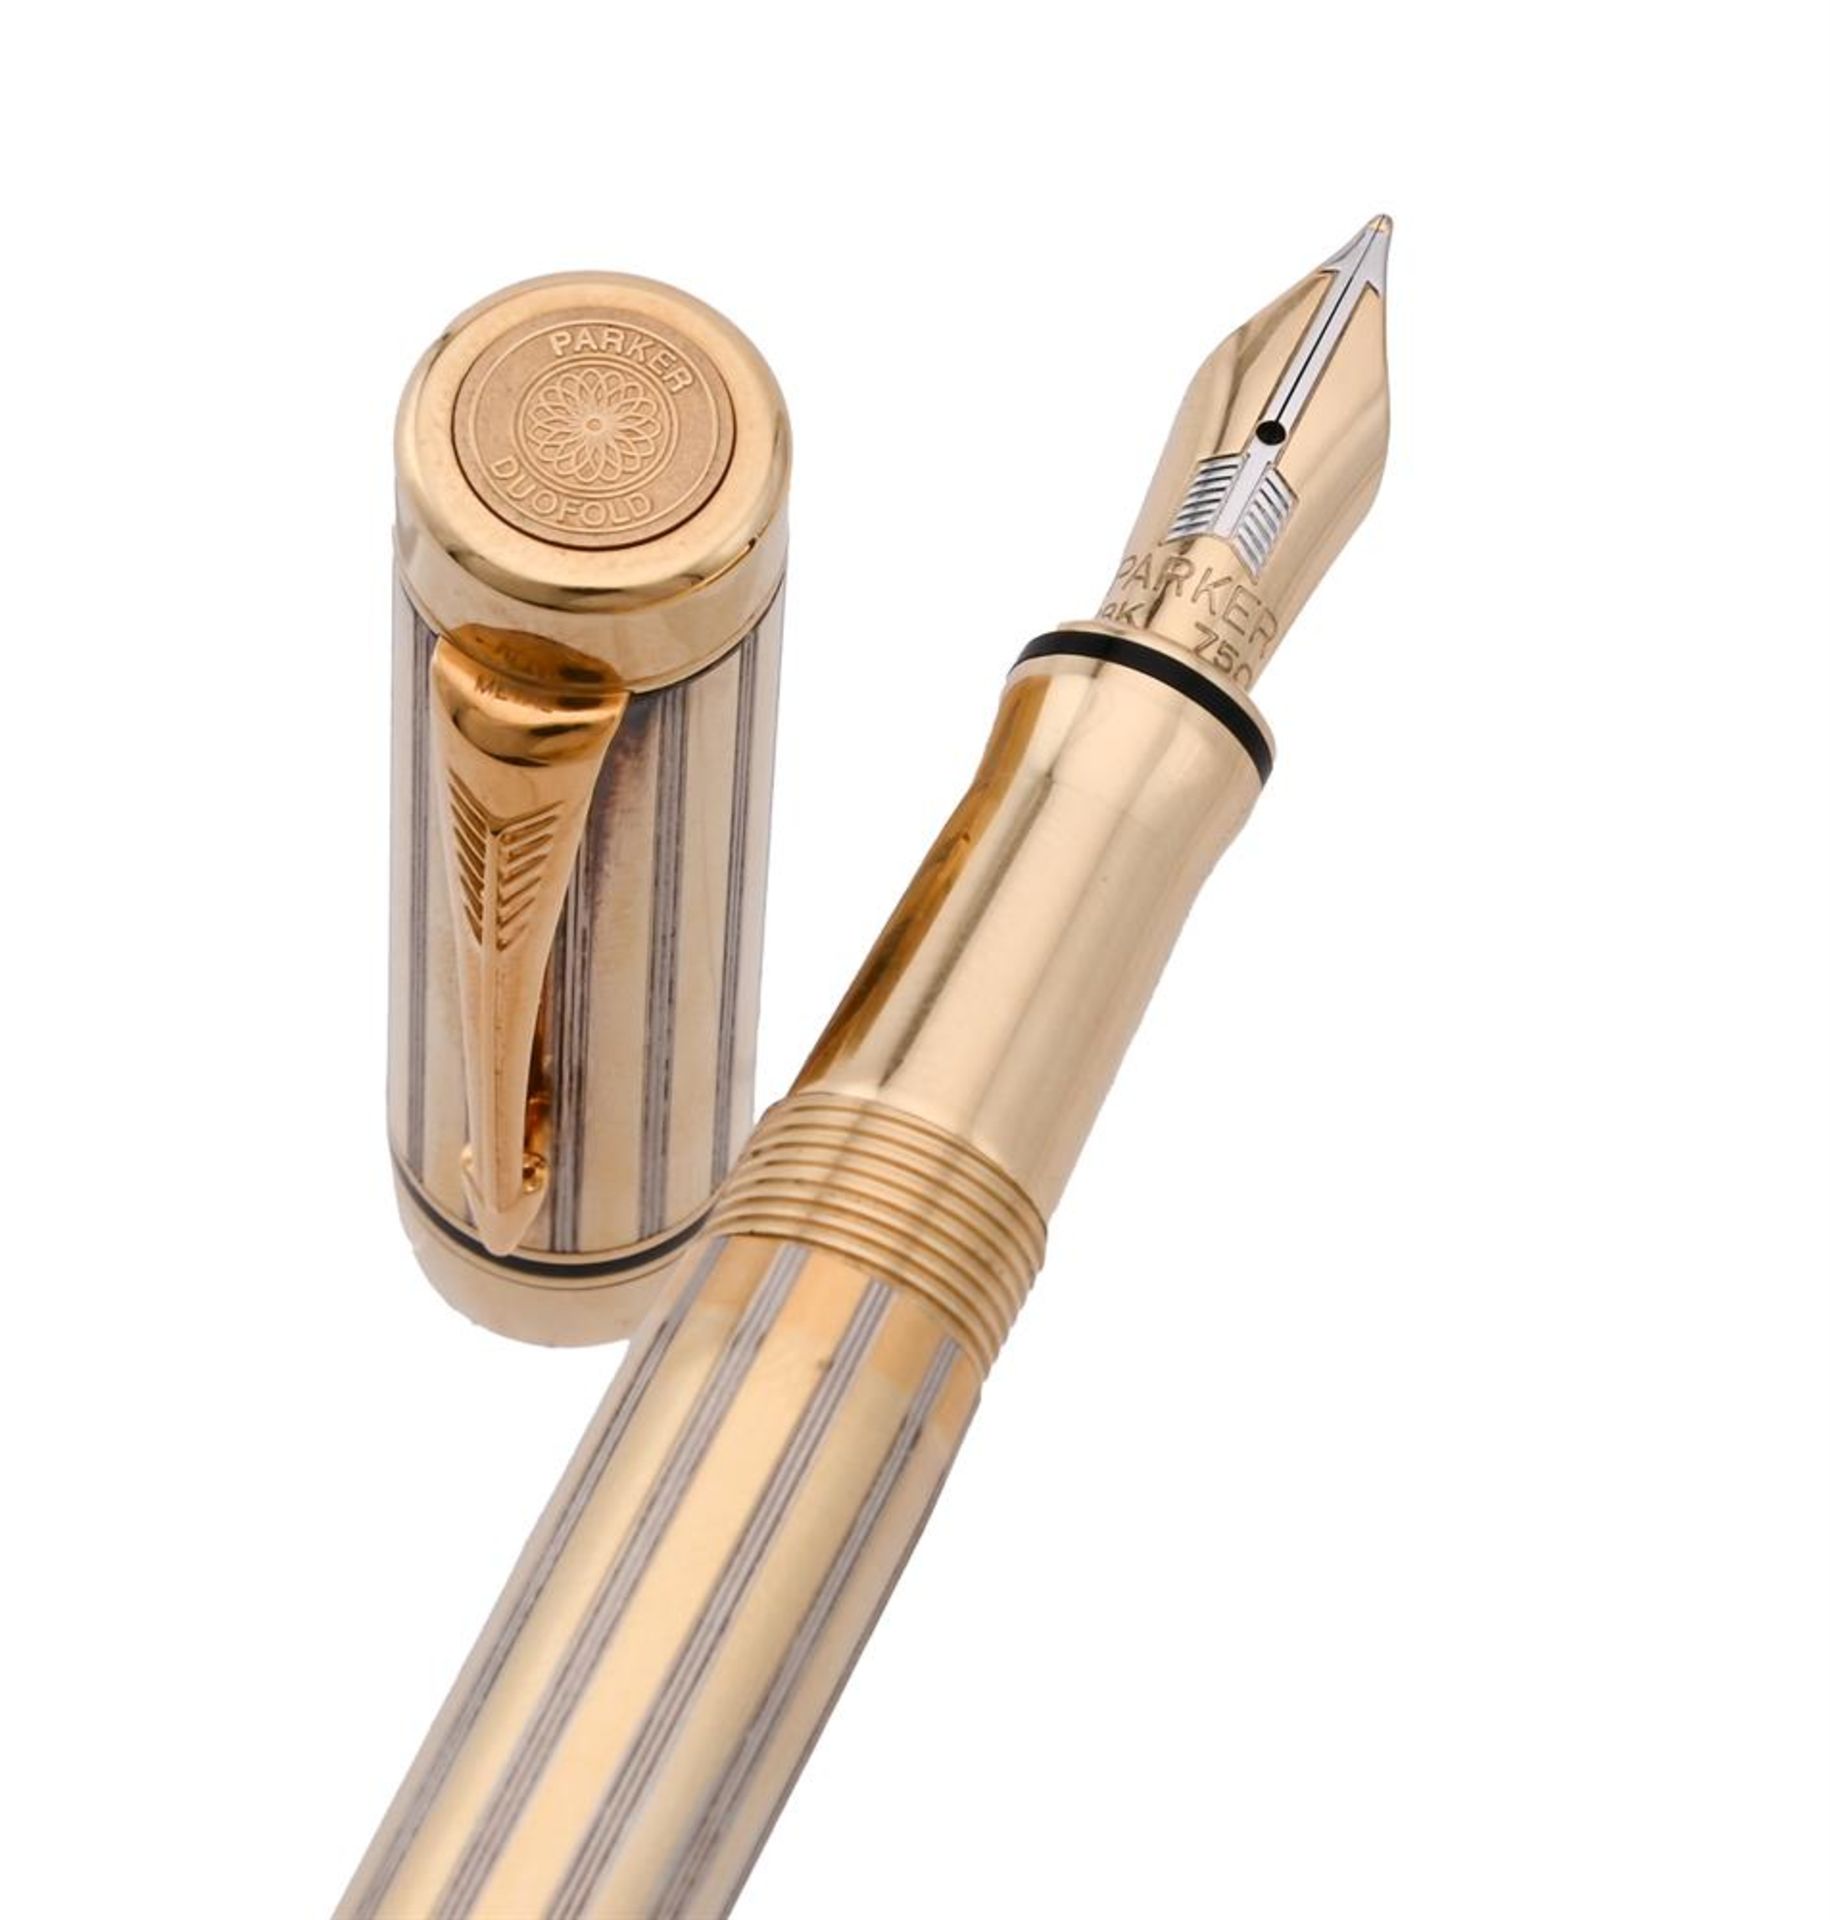 PARKER, DUOFOLD INTERNATIONAL PRESIDENTIAL, A UNIQUE 18 CARAT GOLD FOUNTAIN PEN AND BALL POINT PEN - Image 2 of 3